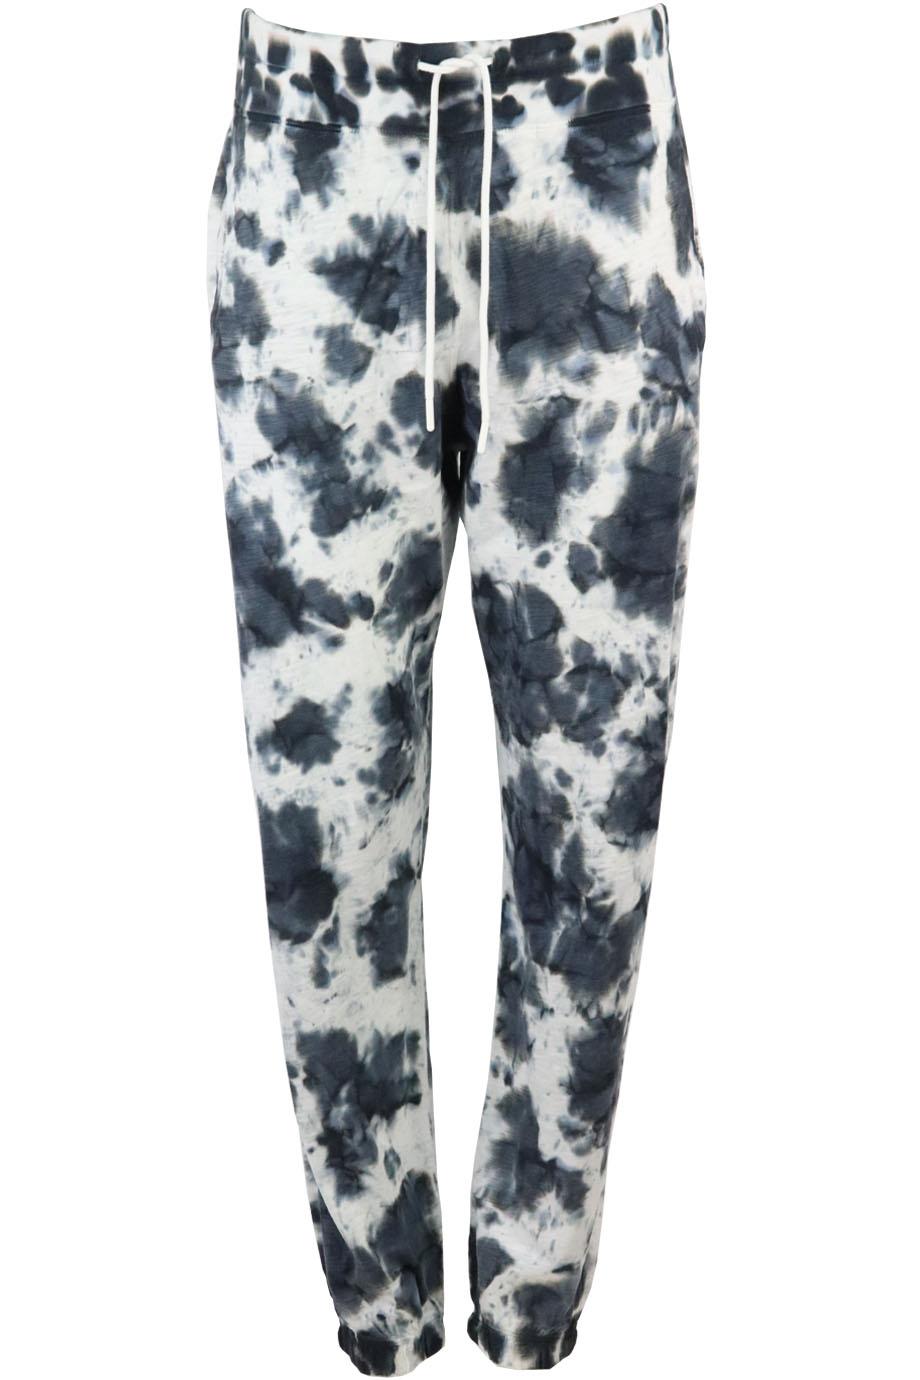 LEALLO TIE DYED COTTON TRACK PANTS LARGE